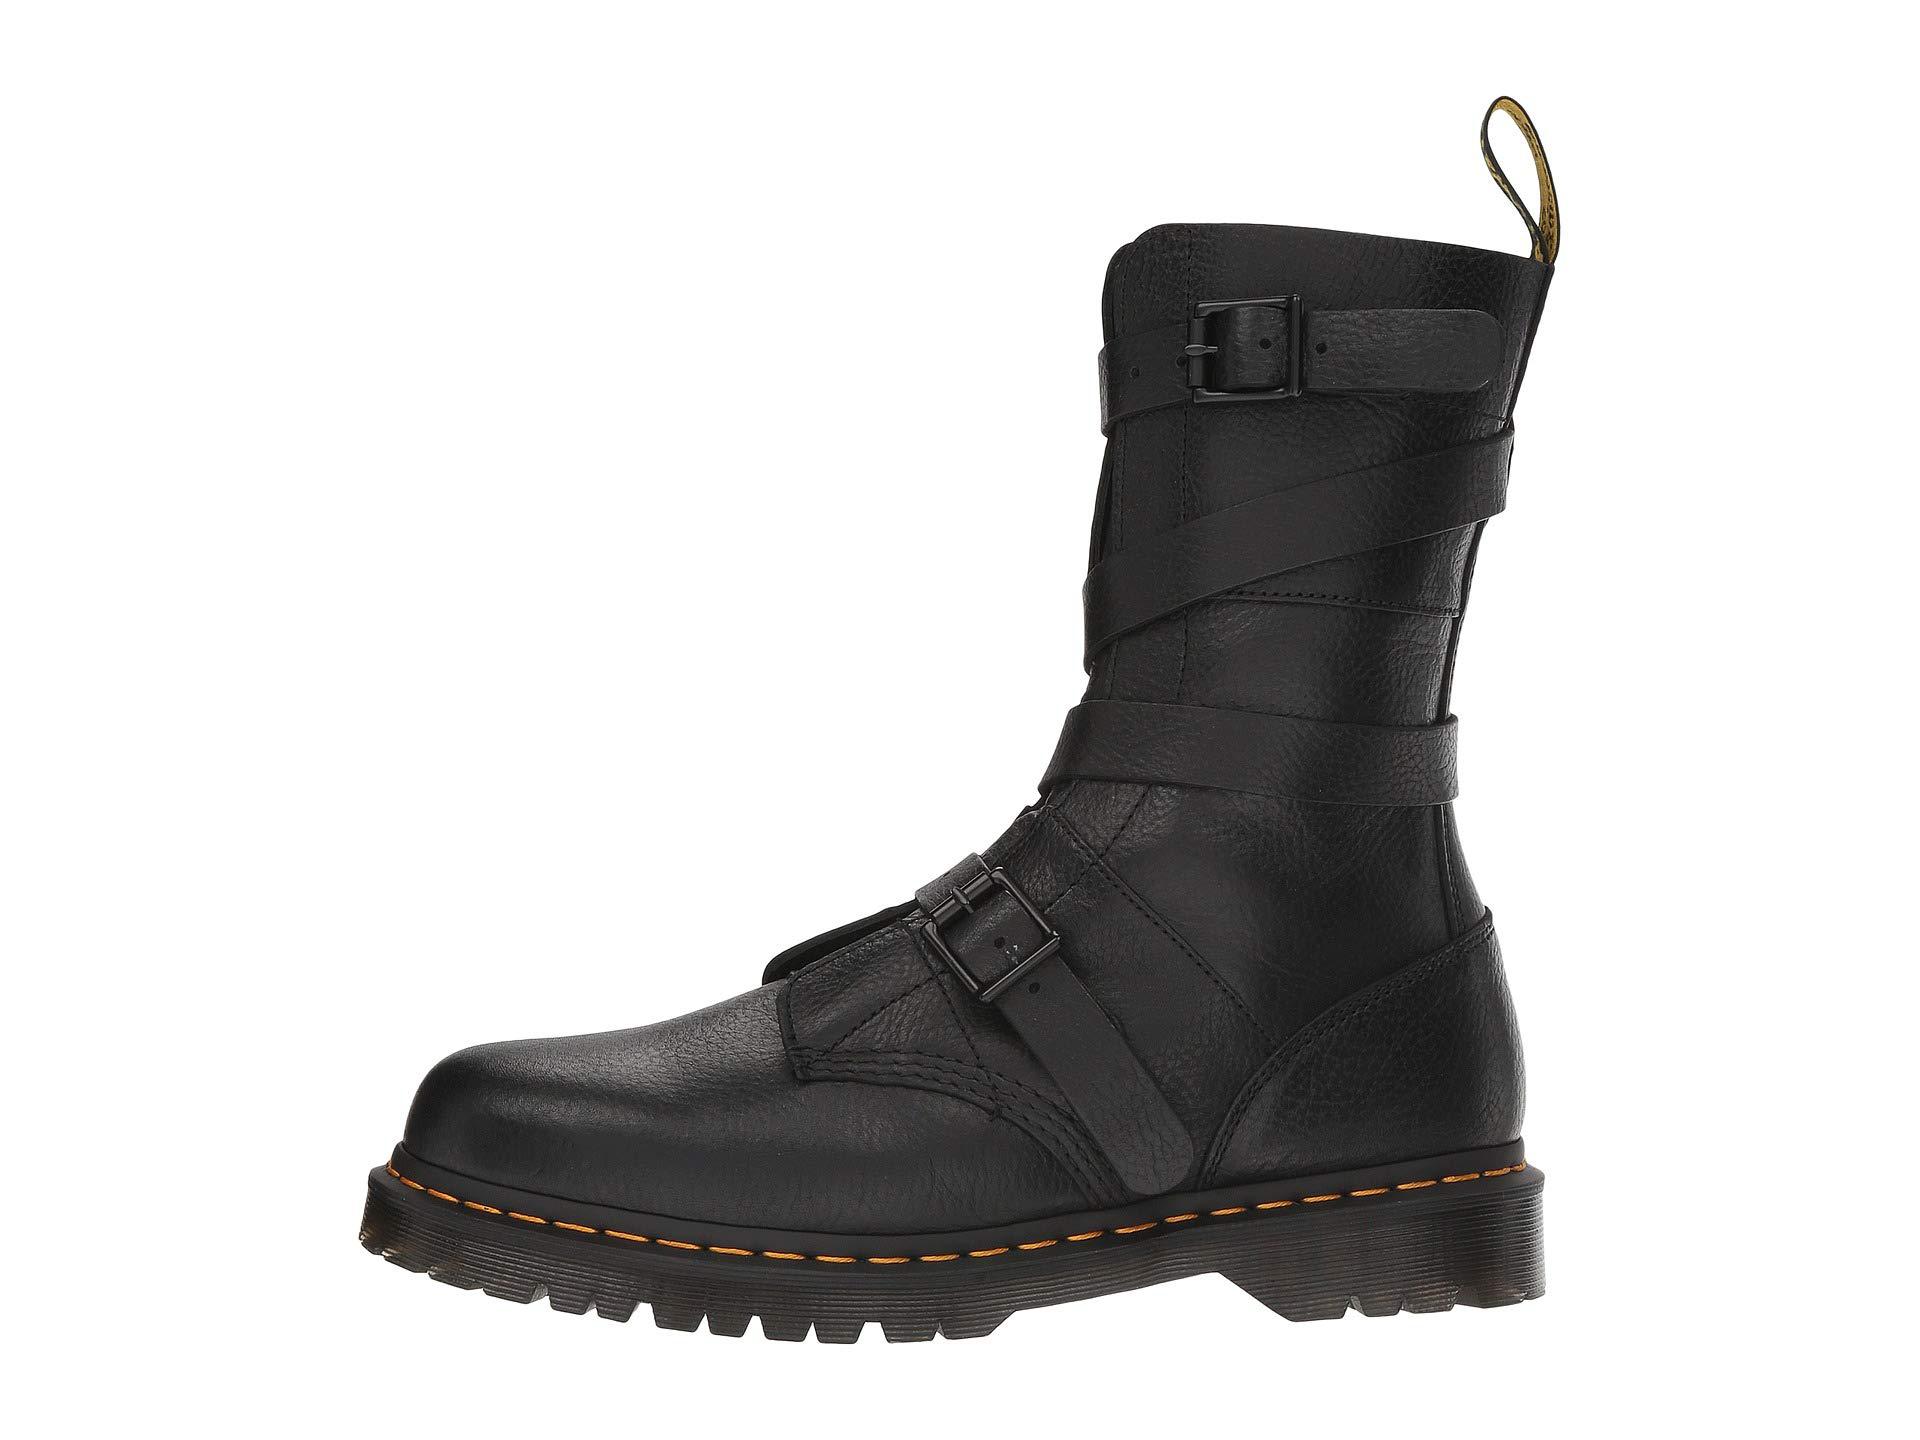 Dr Martens Bevan Black Leather Strappy Flat Ankle Boots Hot Sale, UP TO 60%  OFF | www.ldeventos.com